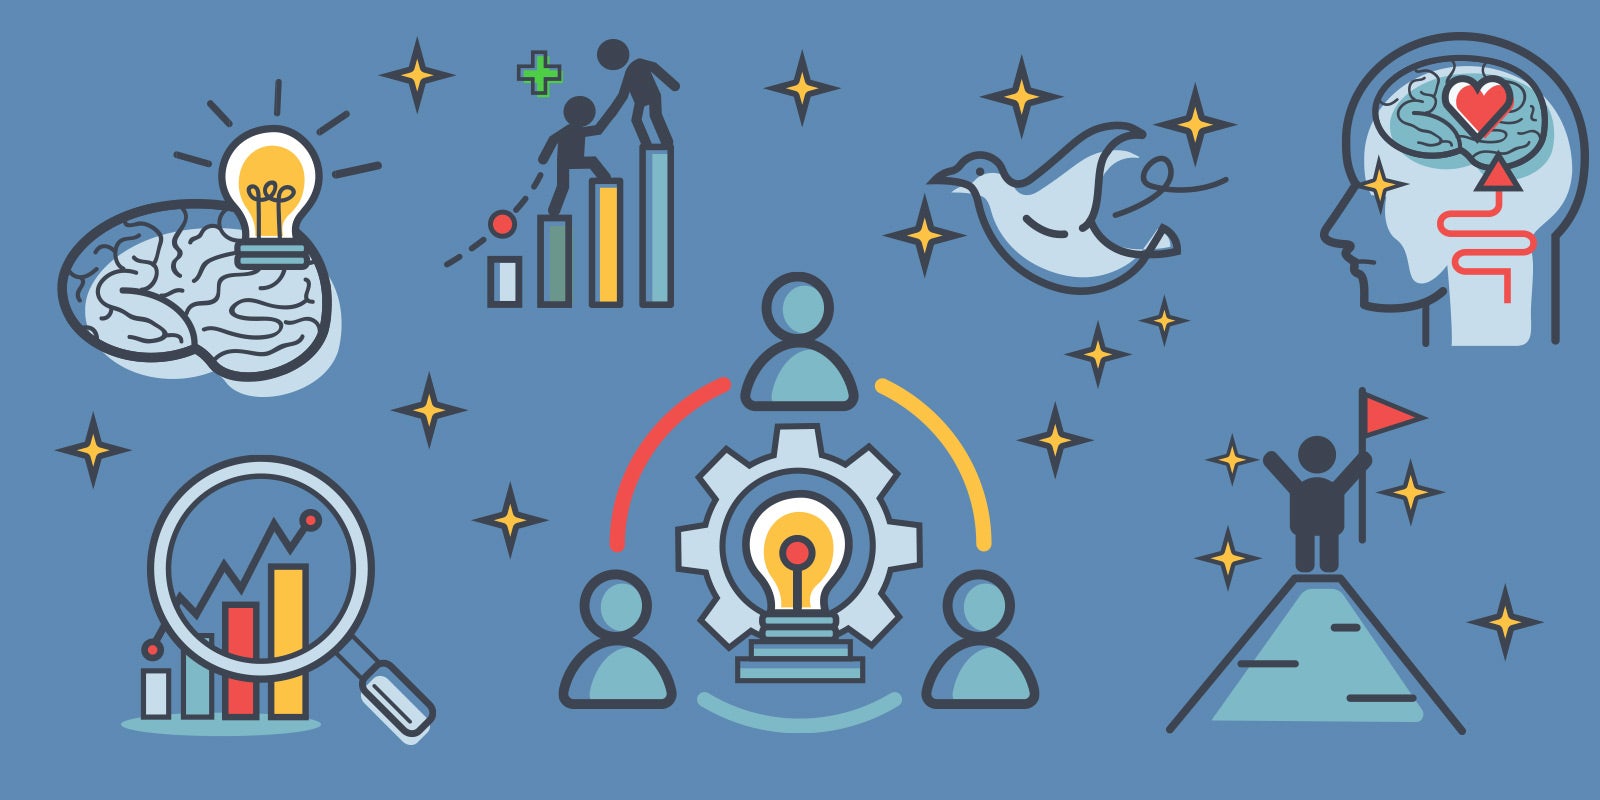 illustrations for each of the types of coaching in the workplace discussed in this blog, for example, a dove for humanist employee coaching and a person on top of a mountain with their hands up for goal-oriented coaching